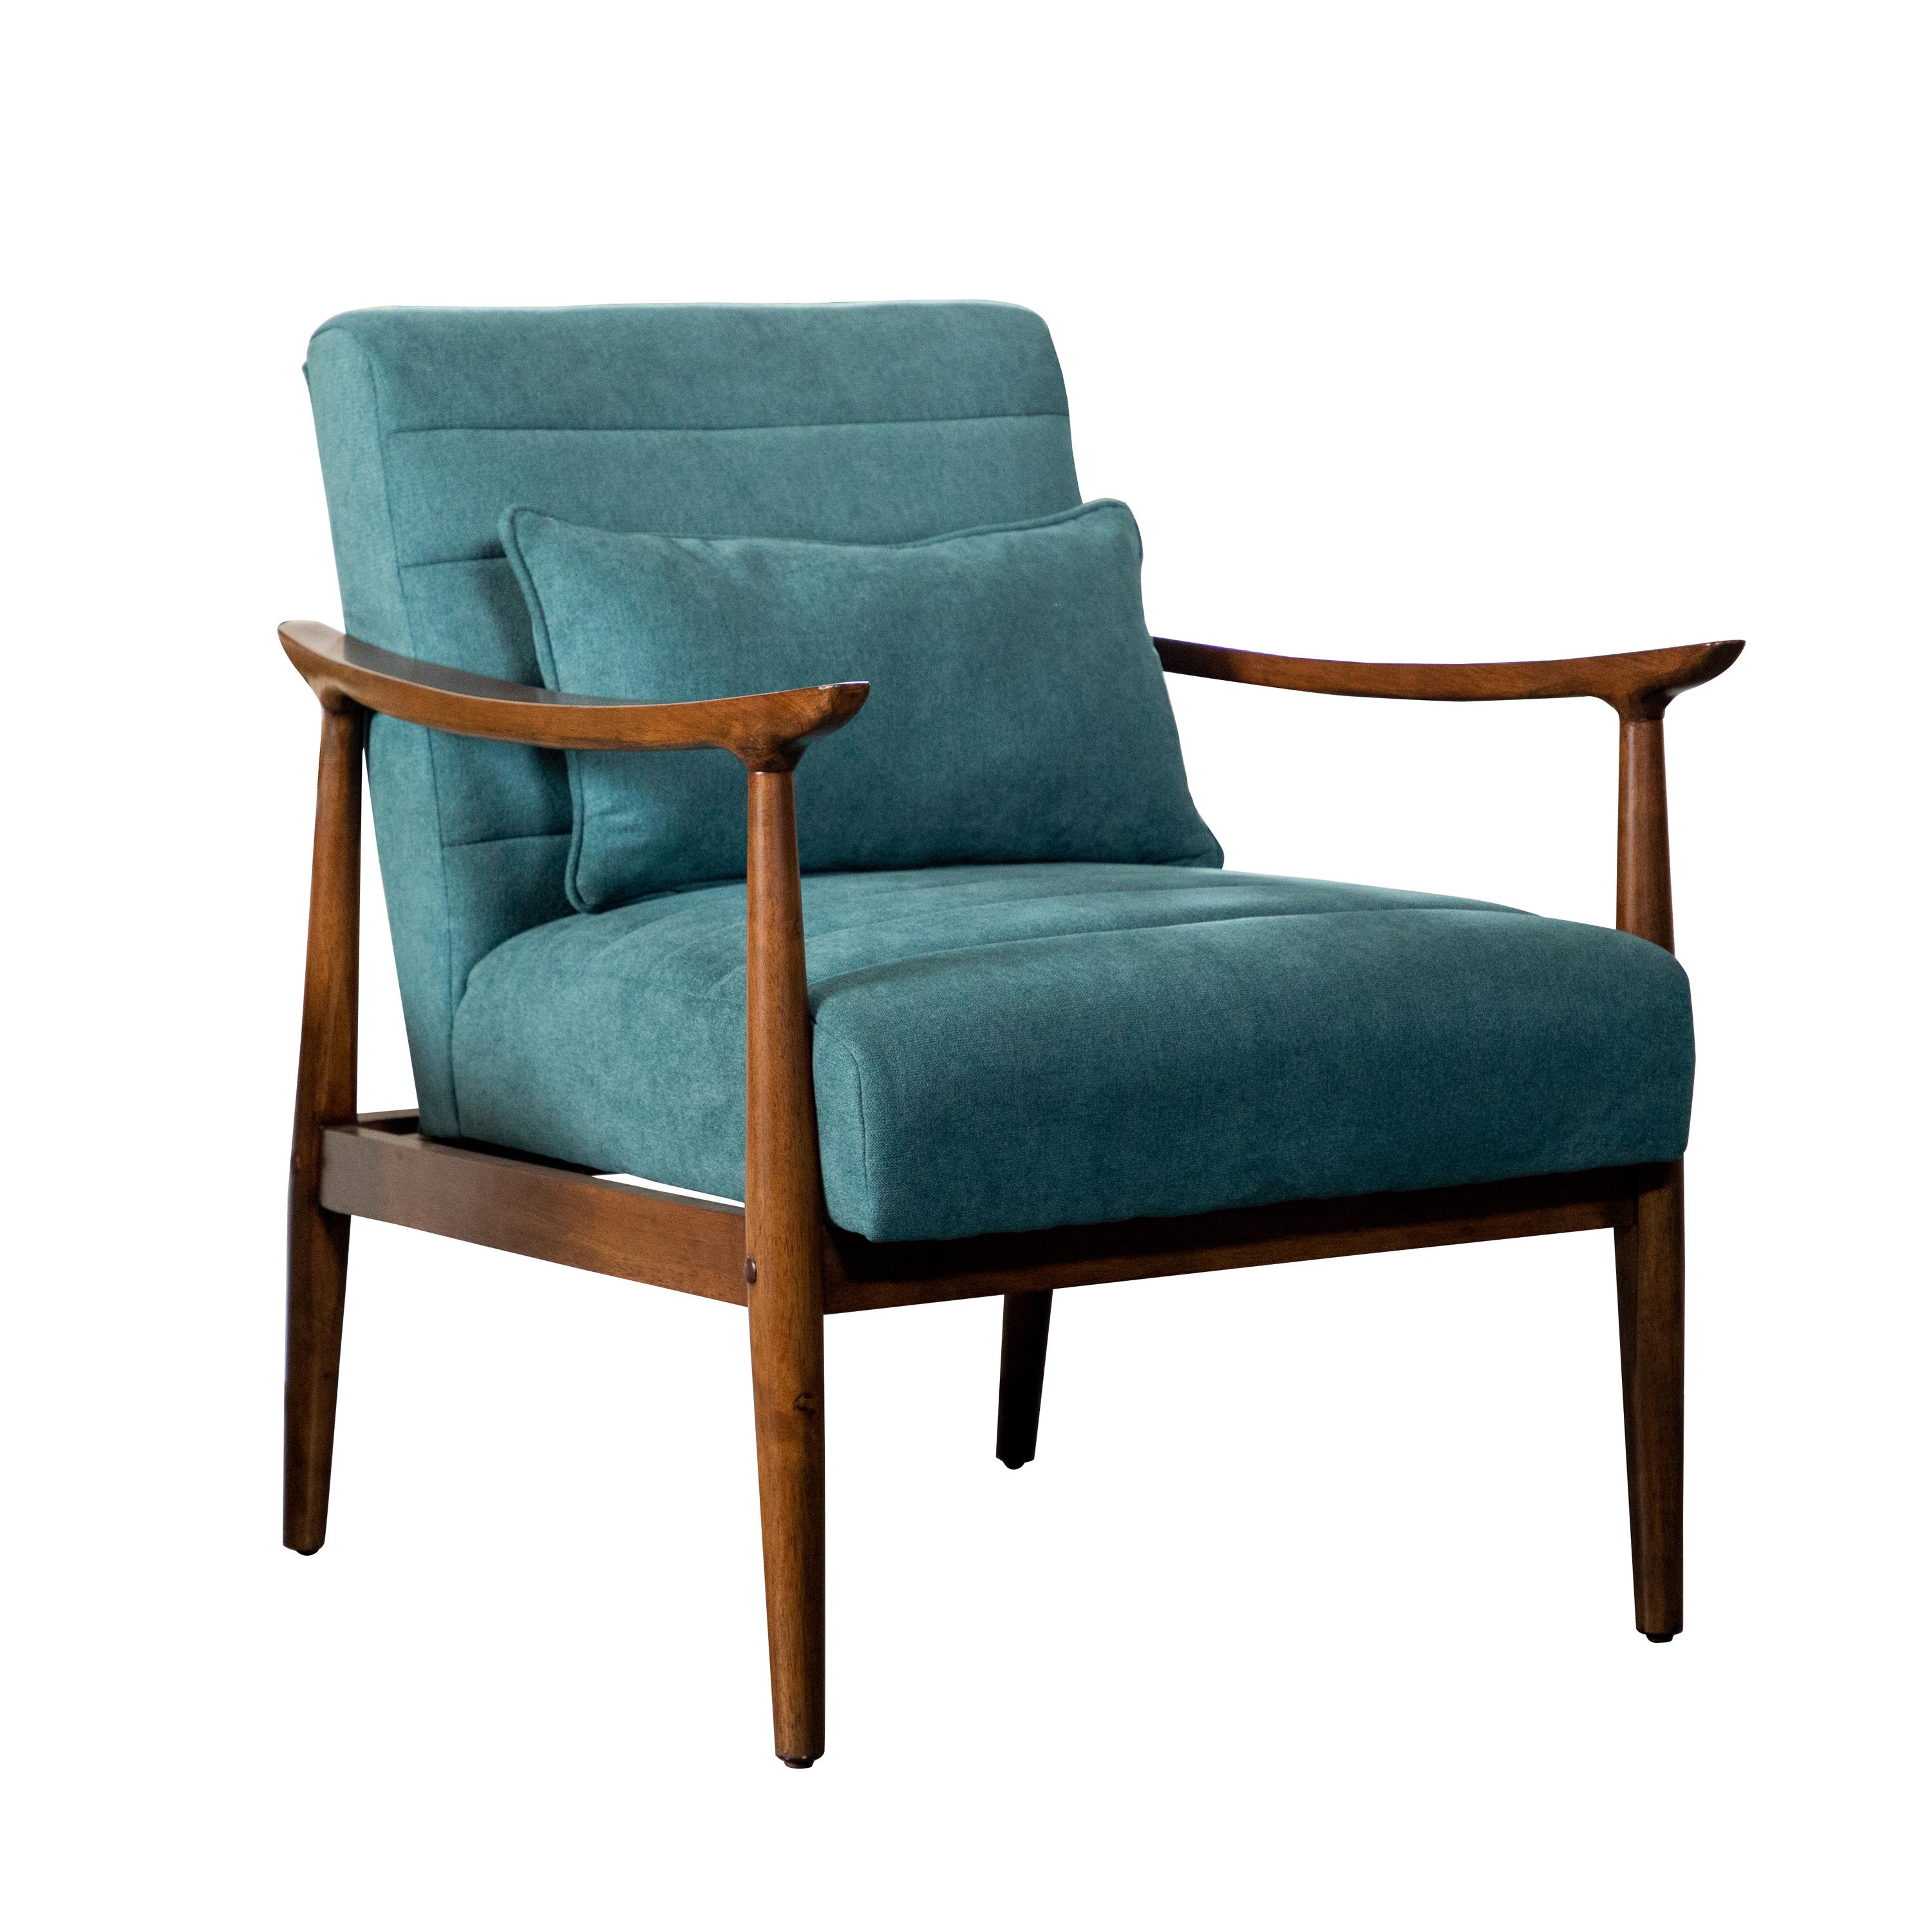 Modern Accent Chair 905572 905572 in Teal 